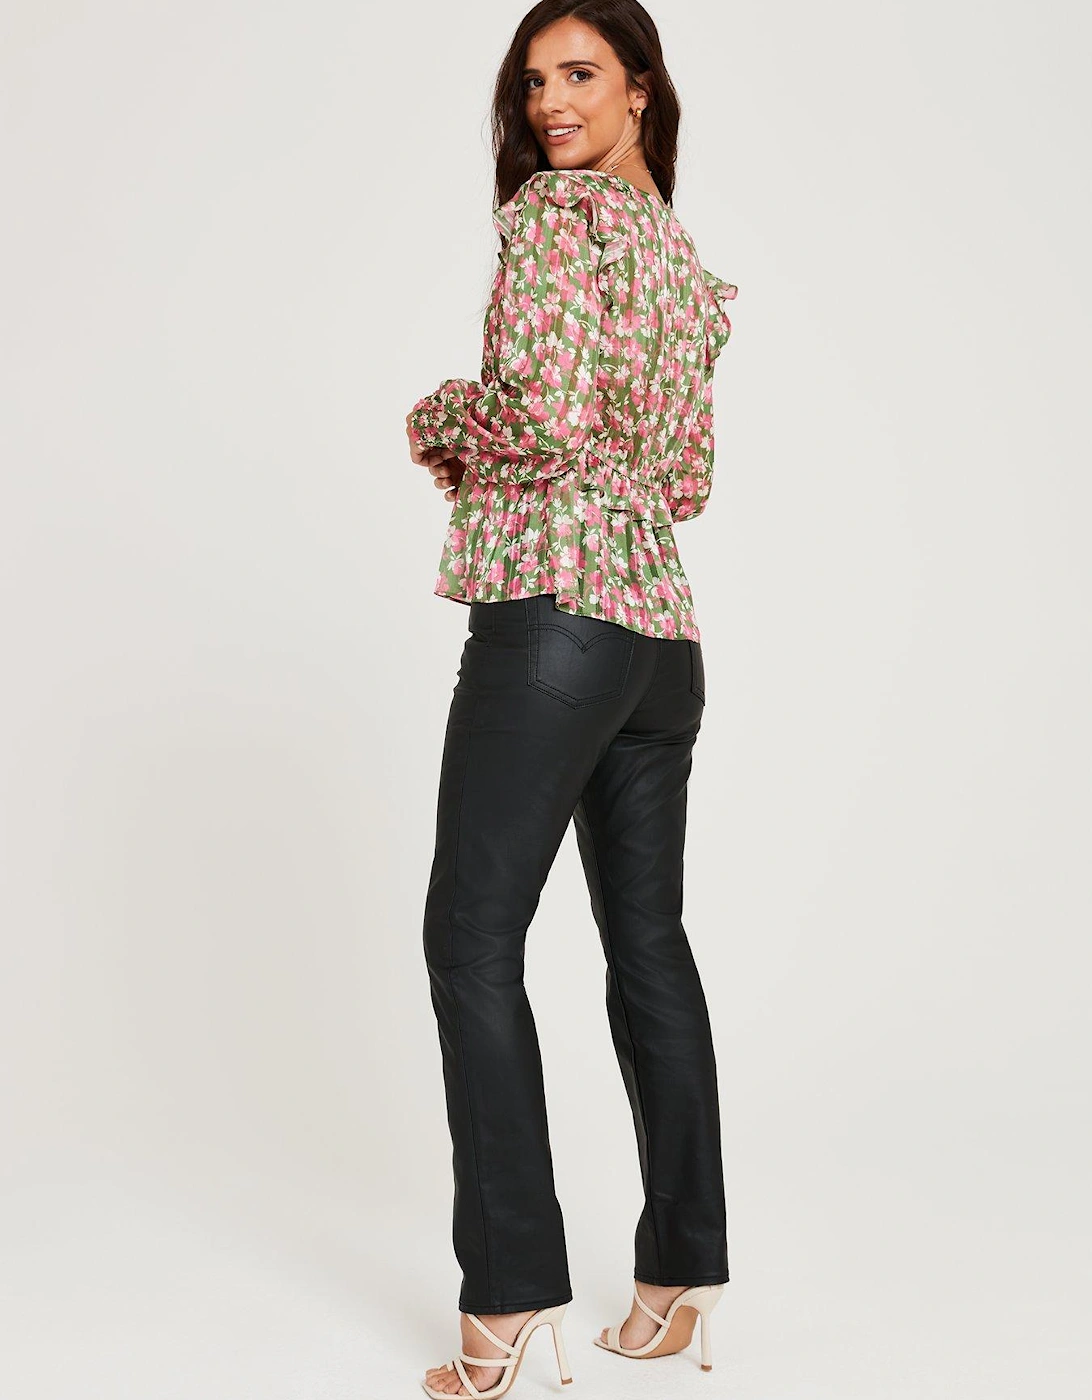 x V by Very Floral Frill Blouse - Multi